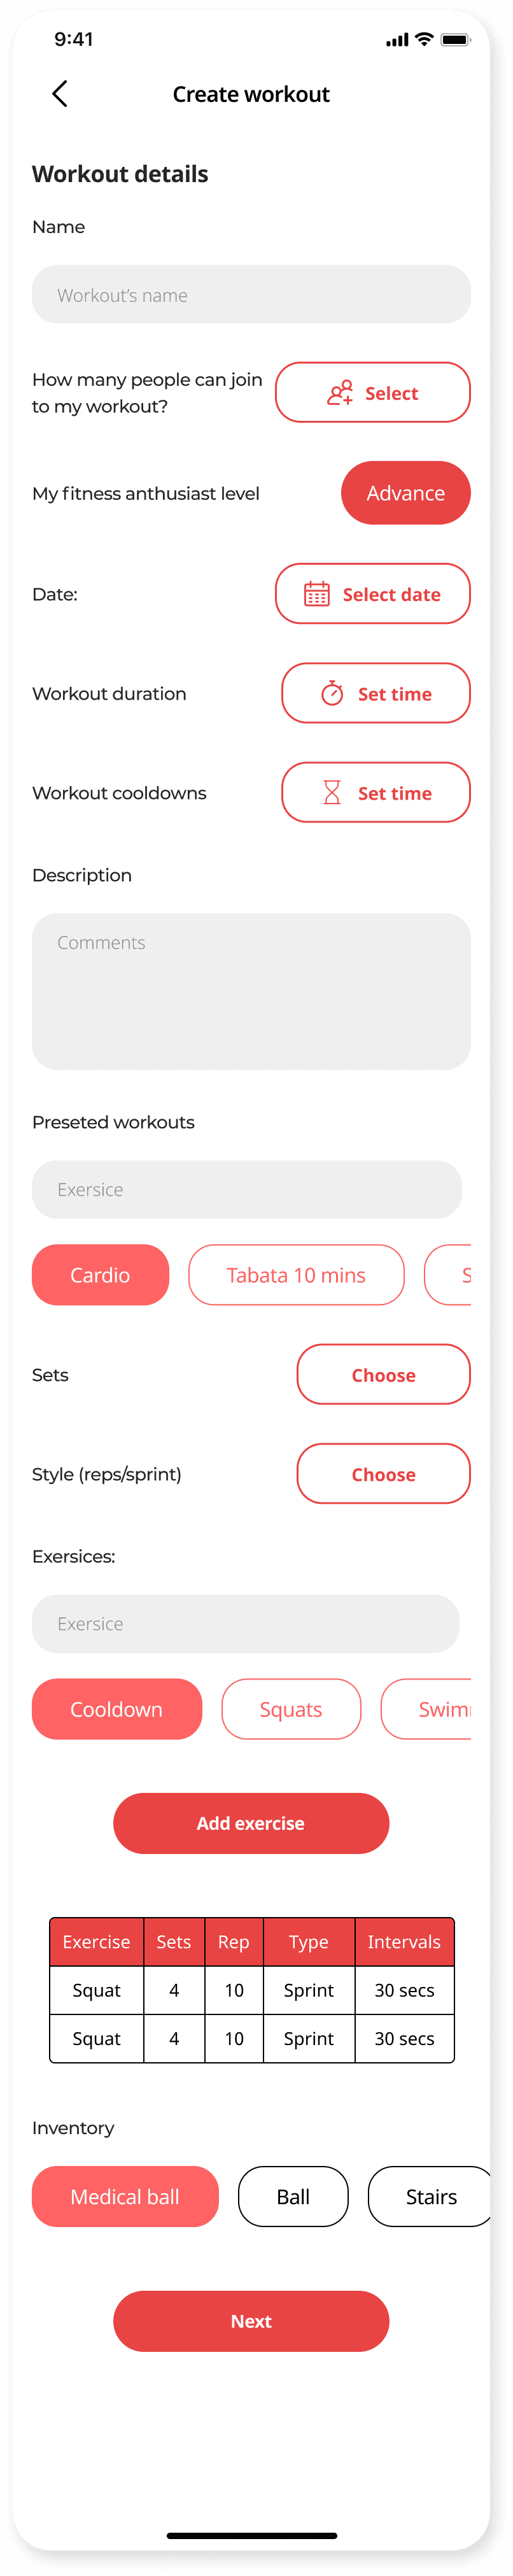 fitkonnect app create workout